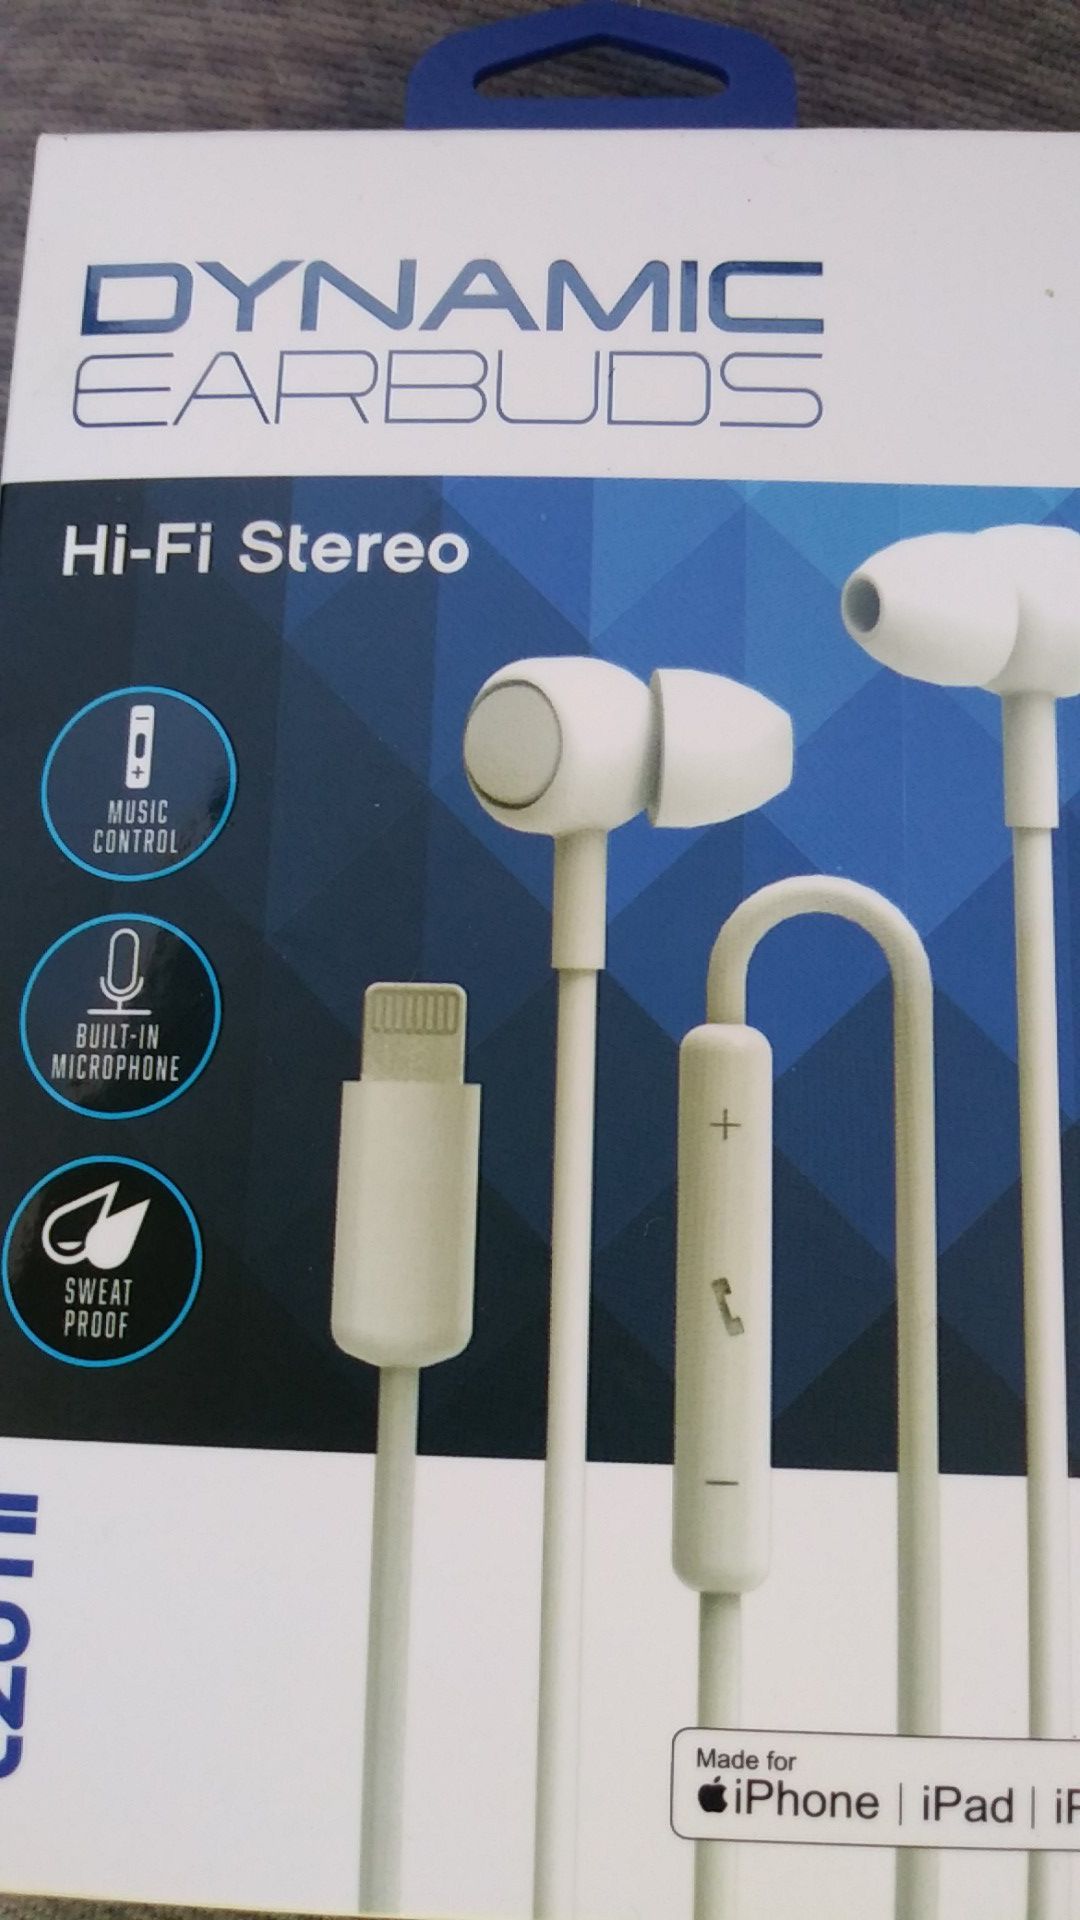 TZUMI HI-FI EARBUDS TOP OF THE LINE for I PHONE